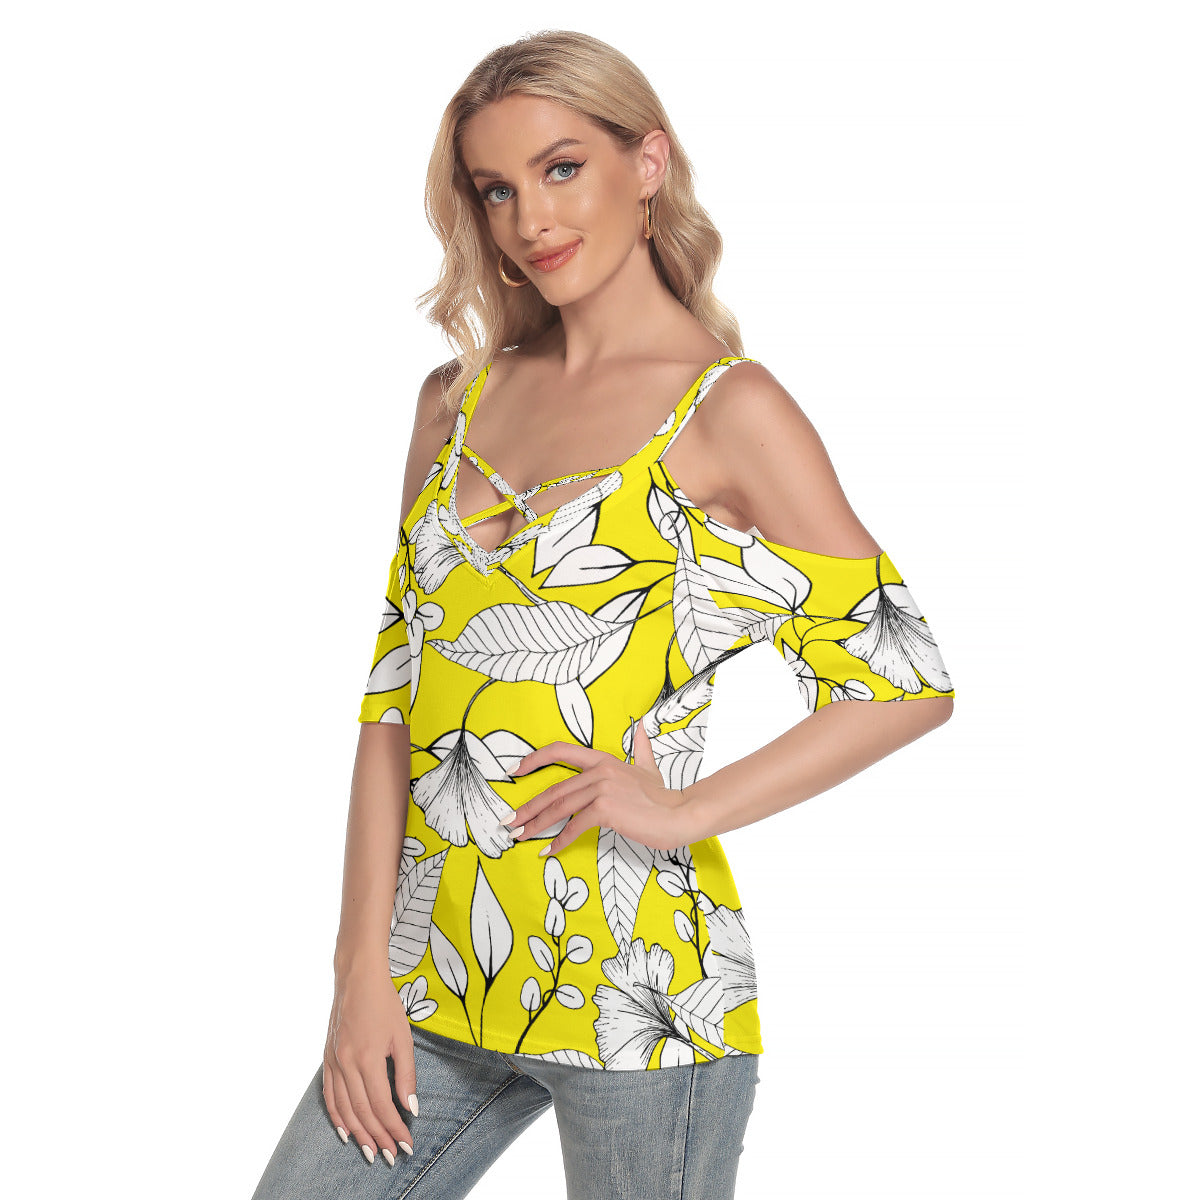 Yellow Floral Shoulder T-Shirt with Criss Cross Straps